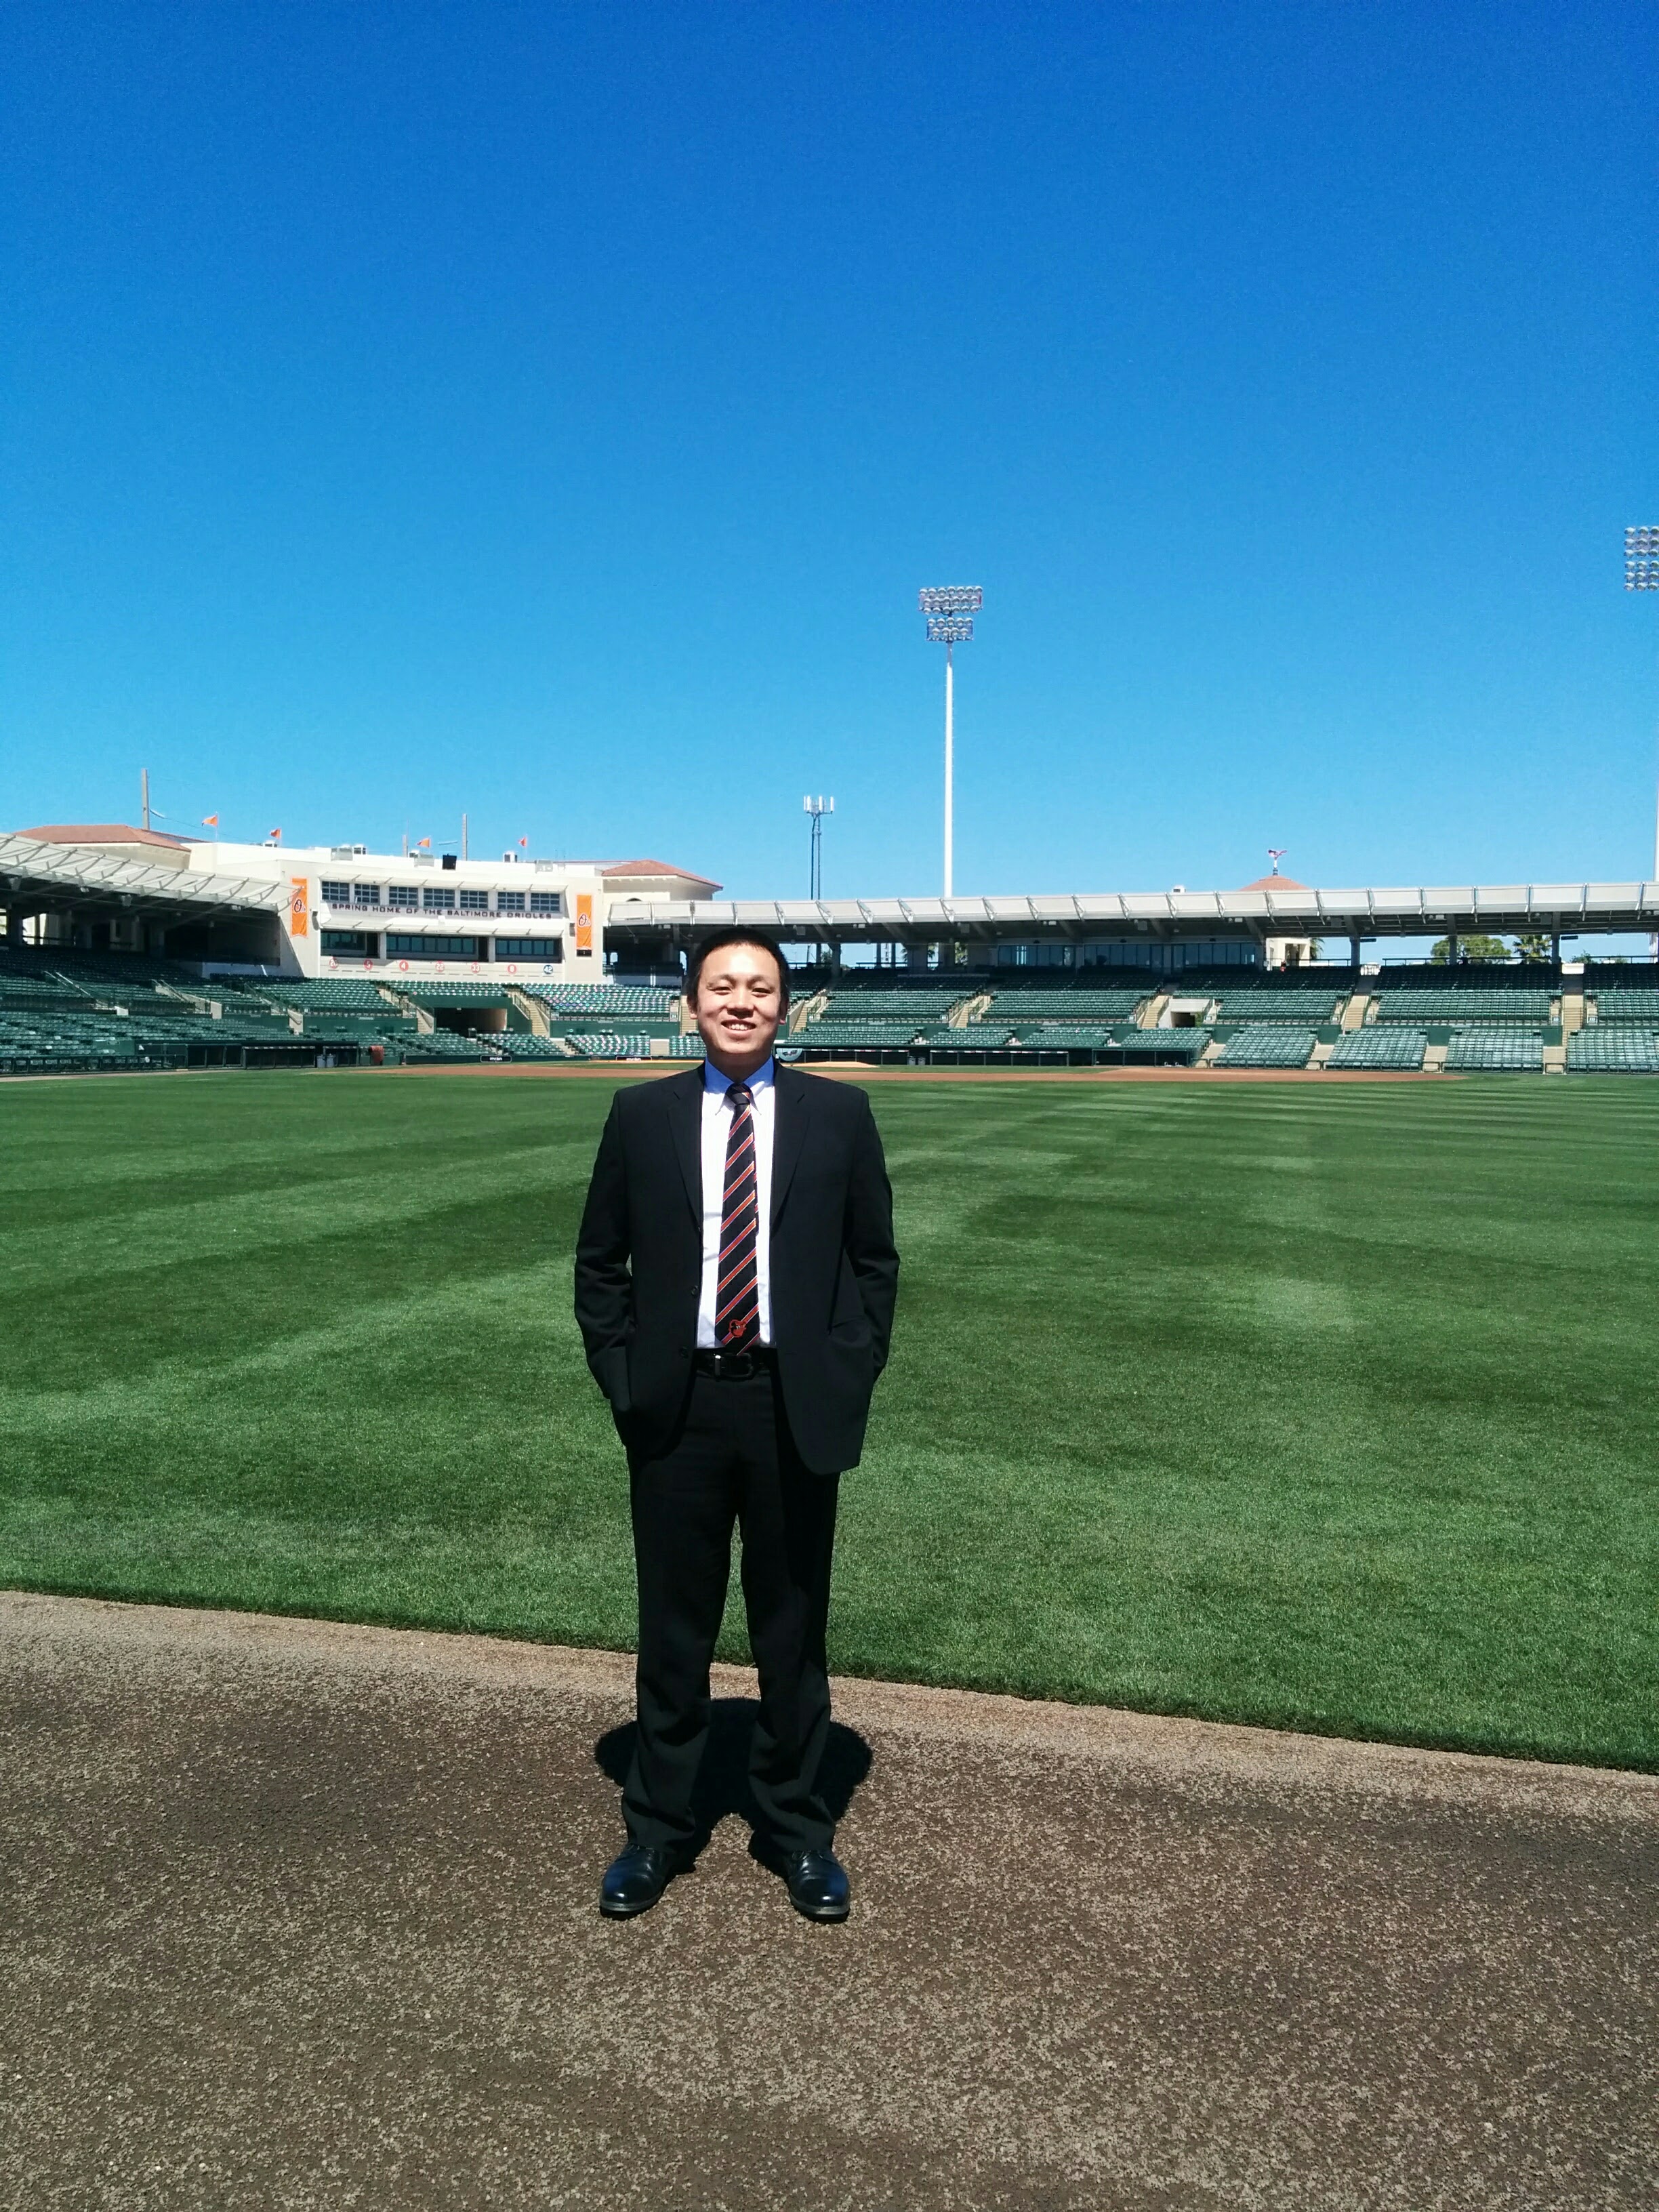 Di Zou standing on a baseball field in a suit